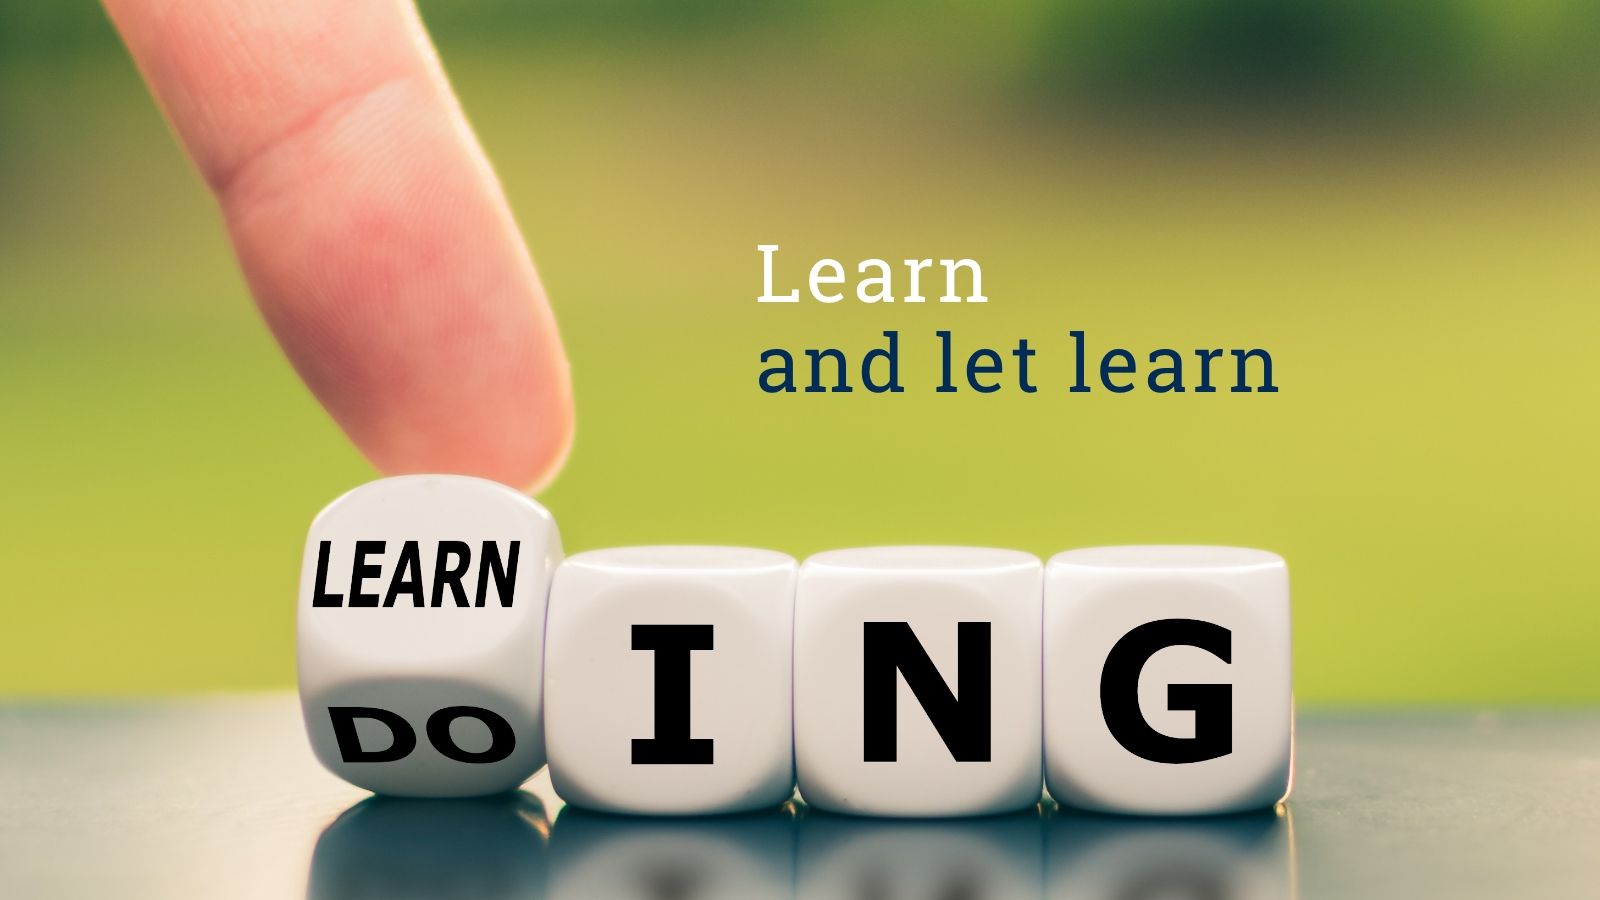 Learn and let learn